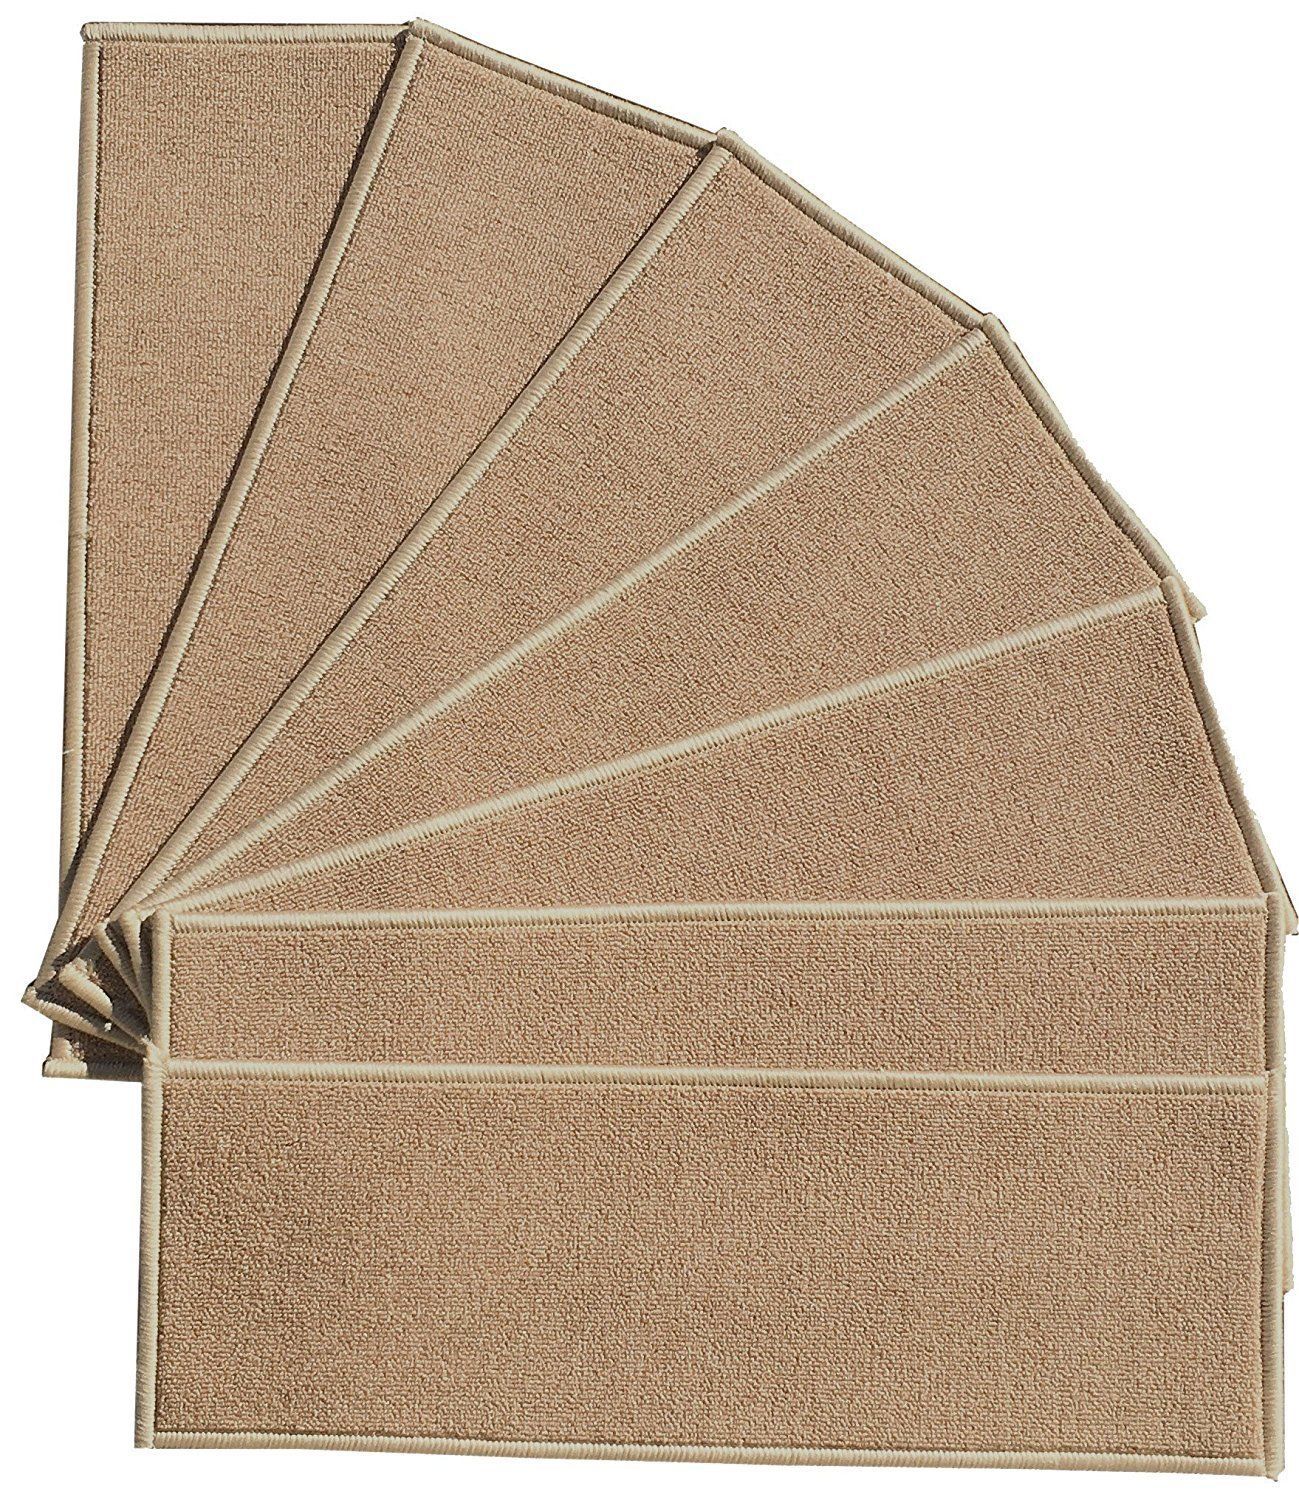 Stair Treads 175517 Non Slip Stair Treads Cover Carpet Indoor Intended For Stair Tread Rug Covers (View 12 of 15)